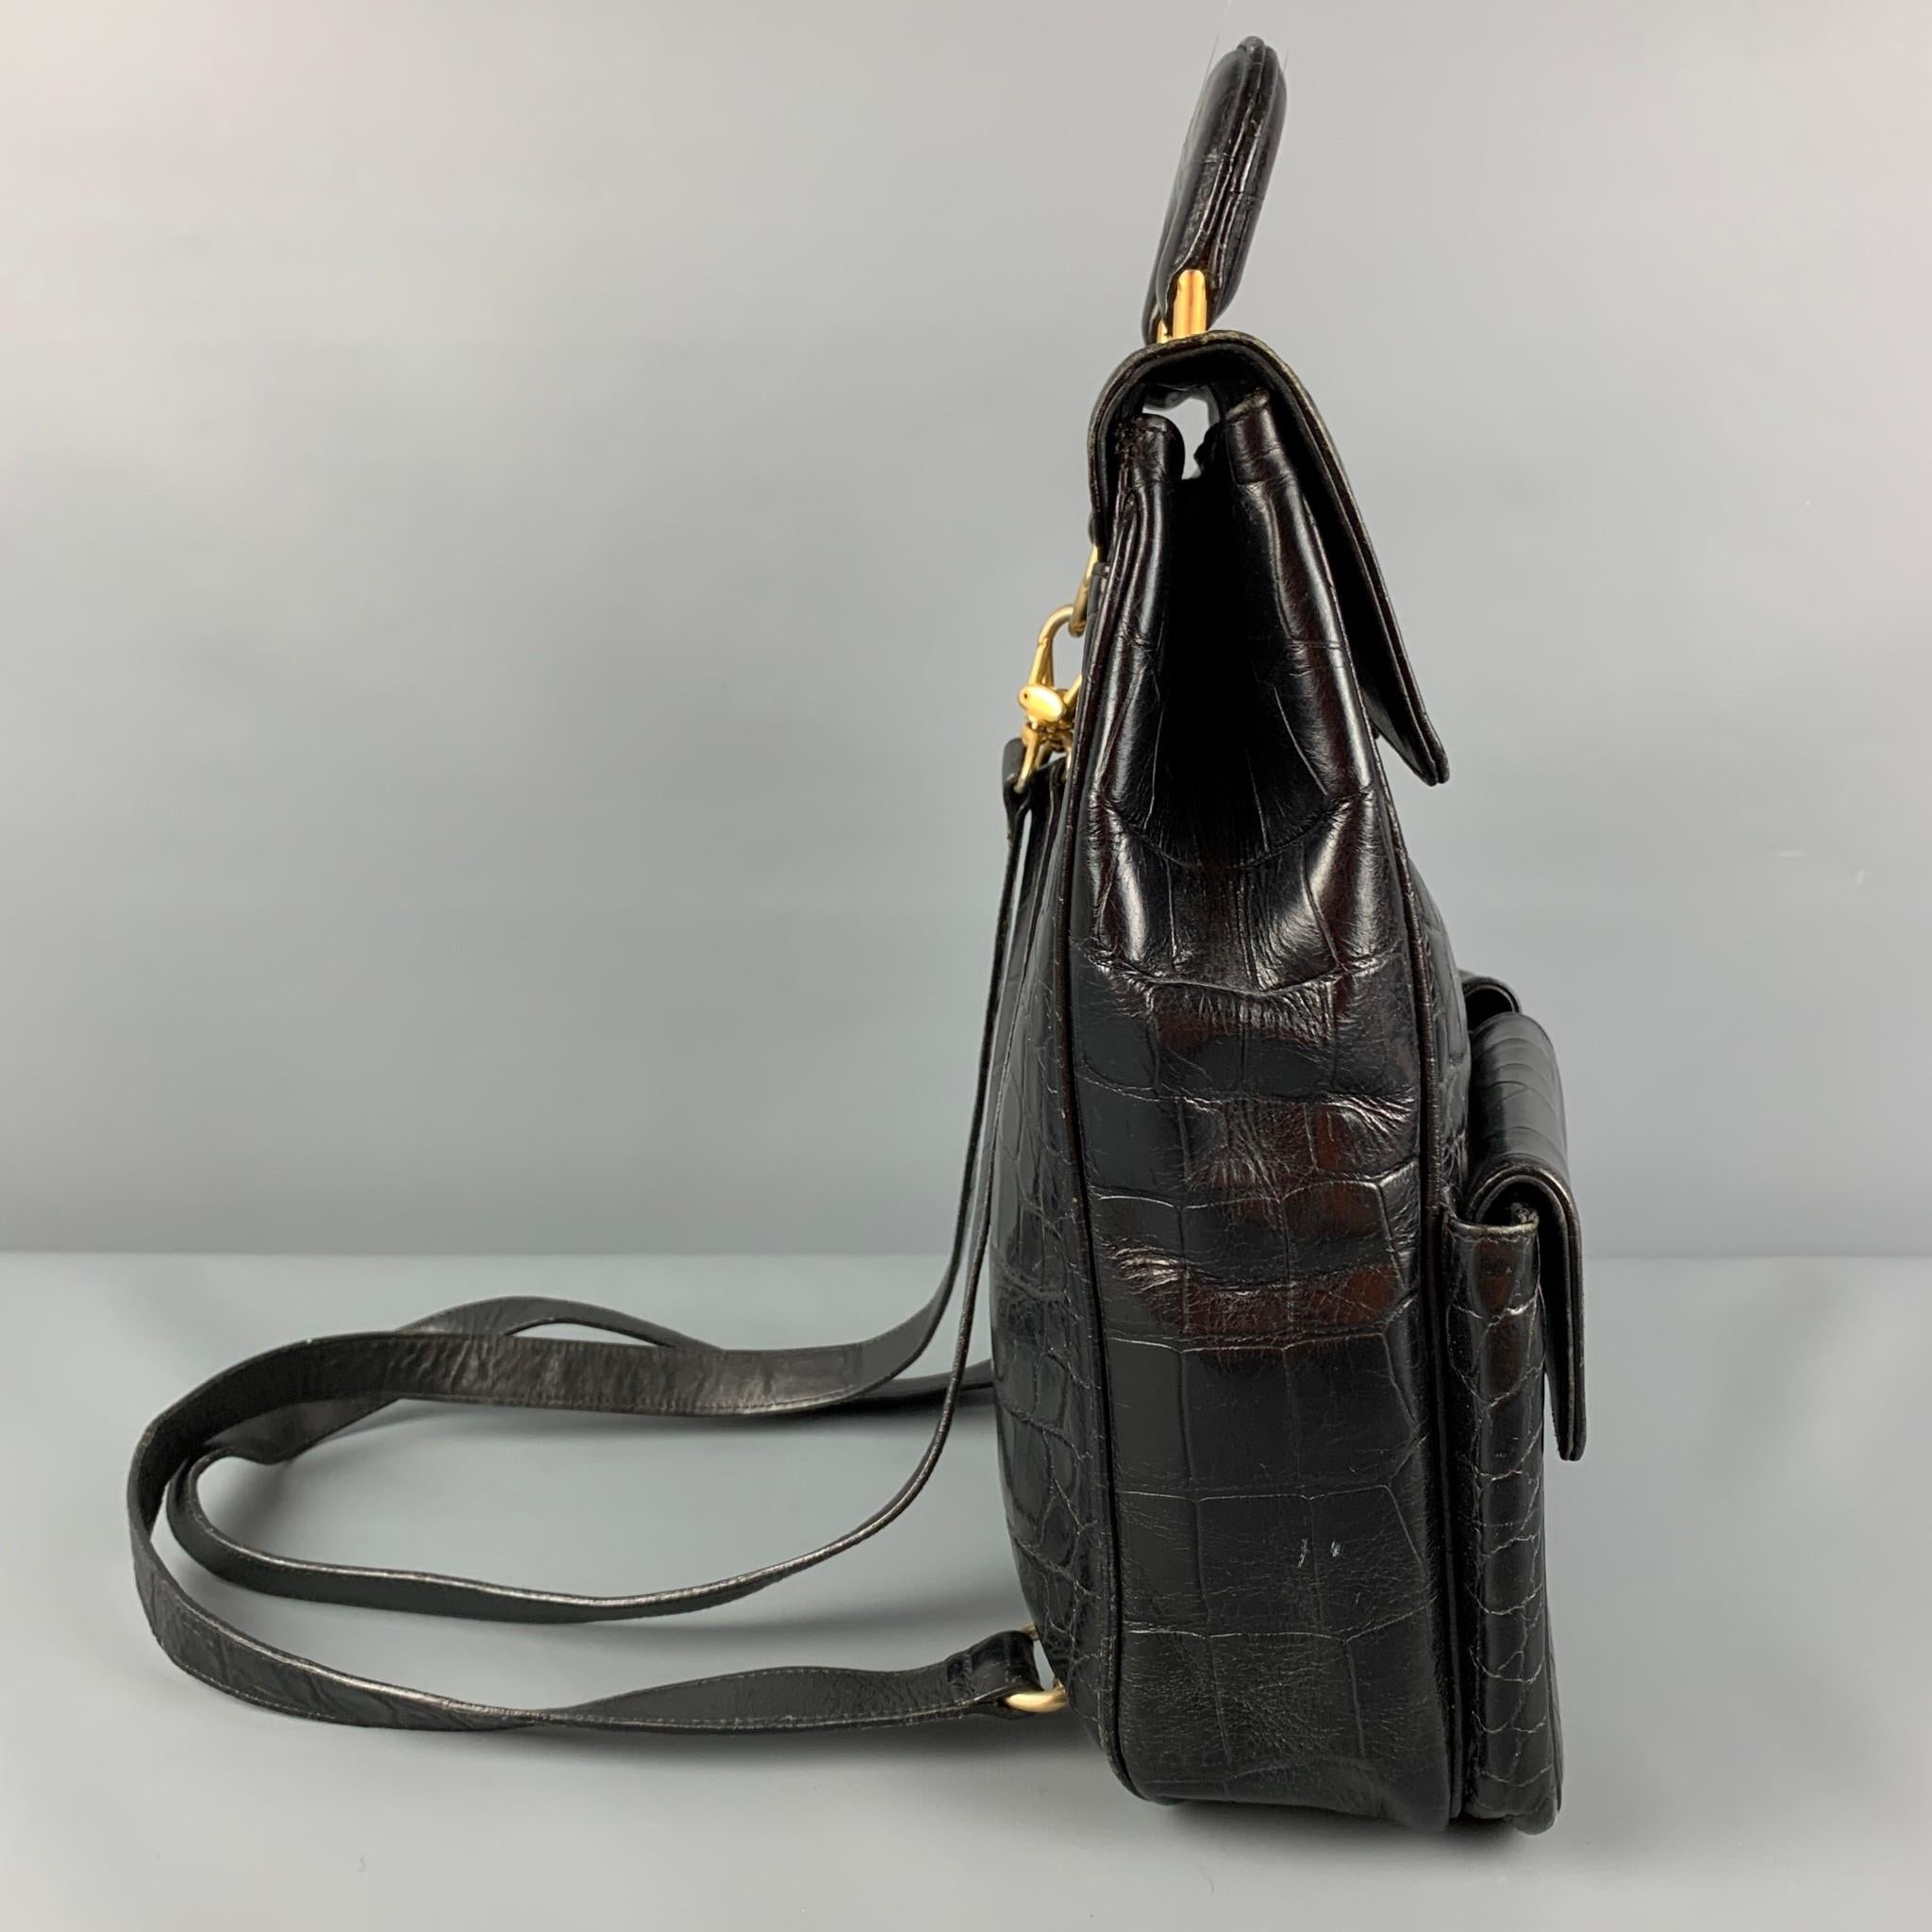 Vintage ANDREA PFISTER backpack comes in a black alligator leather featuring front pockets, top handle, detachable straps, gold tone hardware, inner pocket, and a snap button closure. Made in Italy. 

Good Pre-Owned Condition. Light wear.